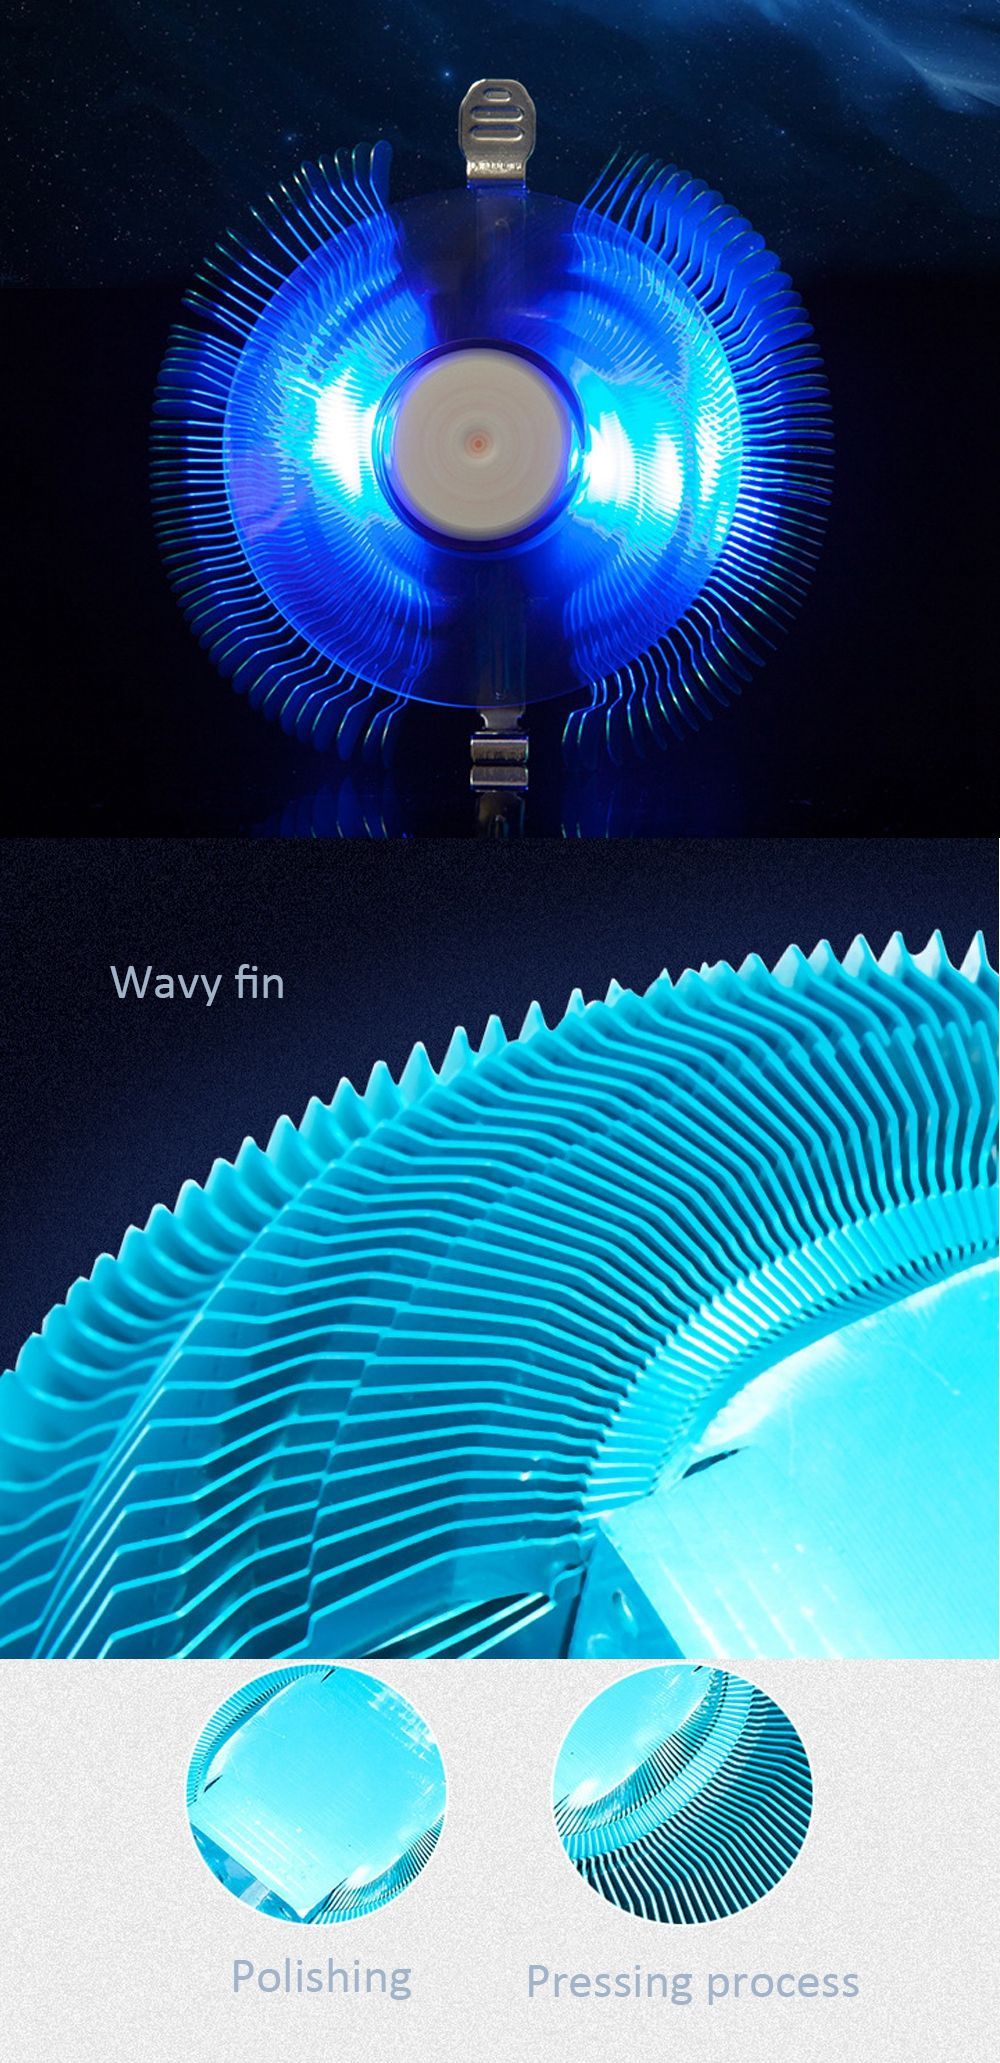 3-Pin-12V-90mm-Blue-LED-Backlit-CPU-Cooler-CPU-Cooling-Fan-Fin-Compression-Cooler-Heatsink-with-Ther-1600756